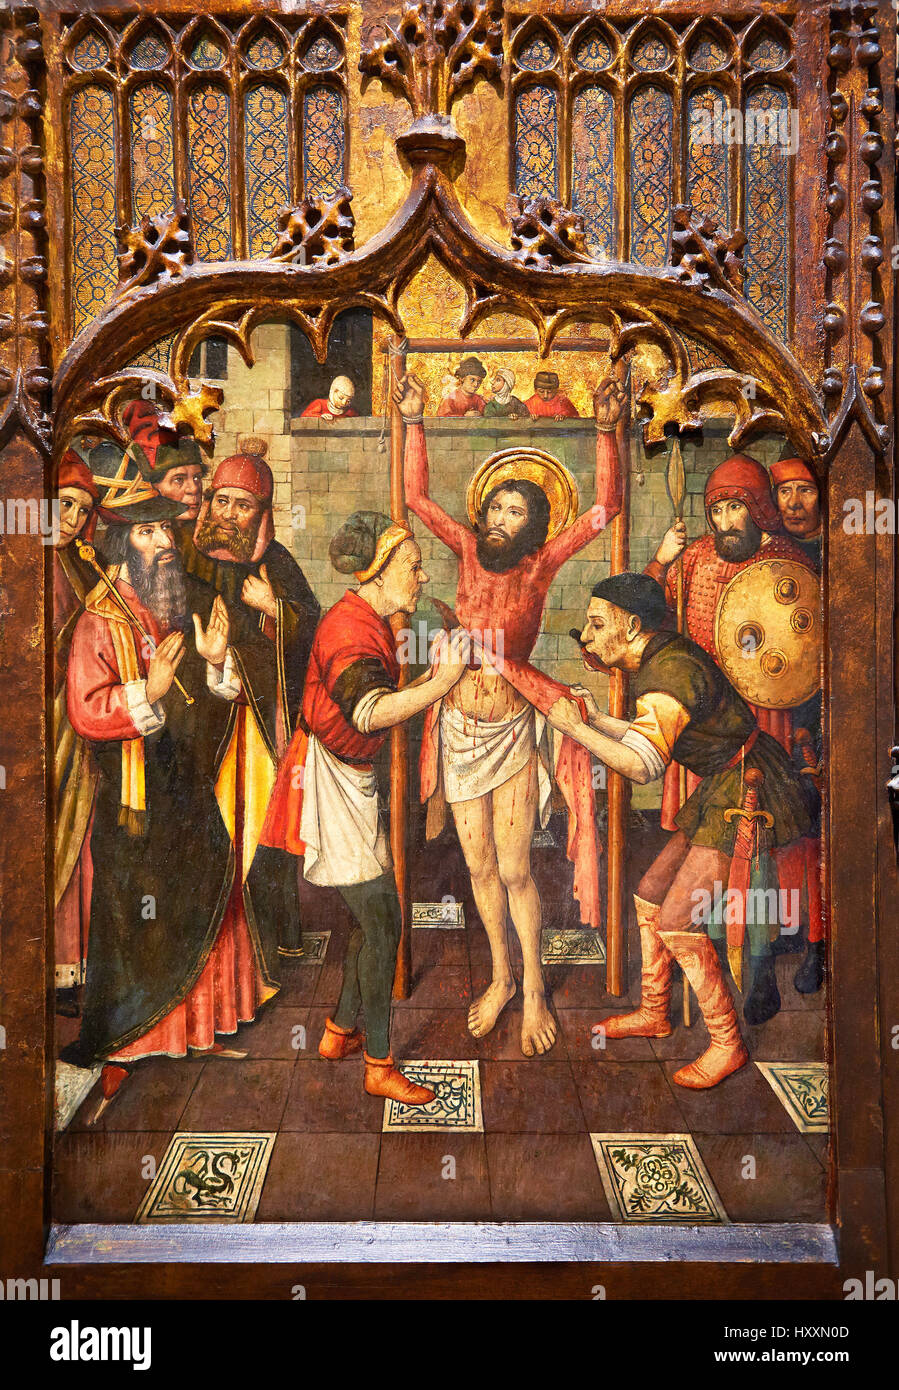 Gothic Altarpiece painting of Christs cucifiction at Calvary by Jaume Huguet, National Museum of Catalan Art MNAC   24365. Stock Photo